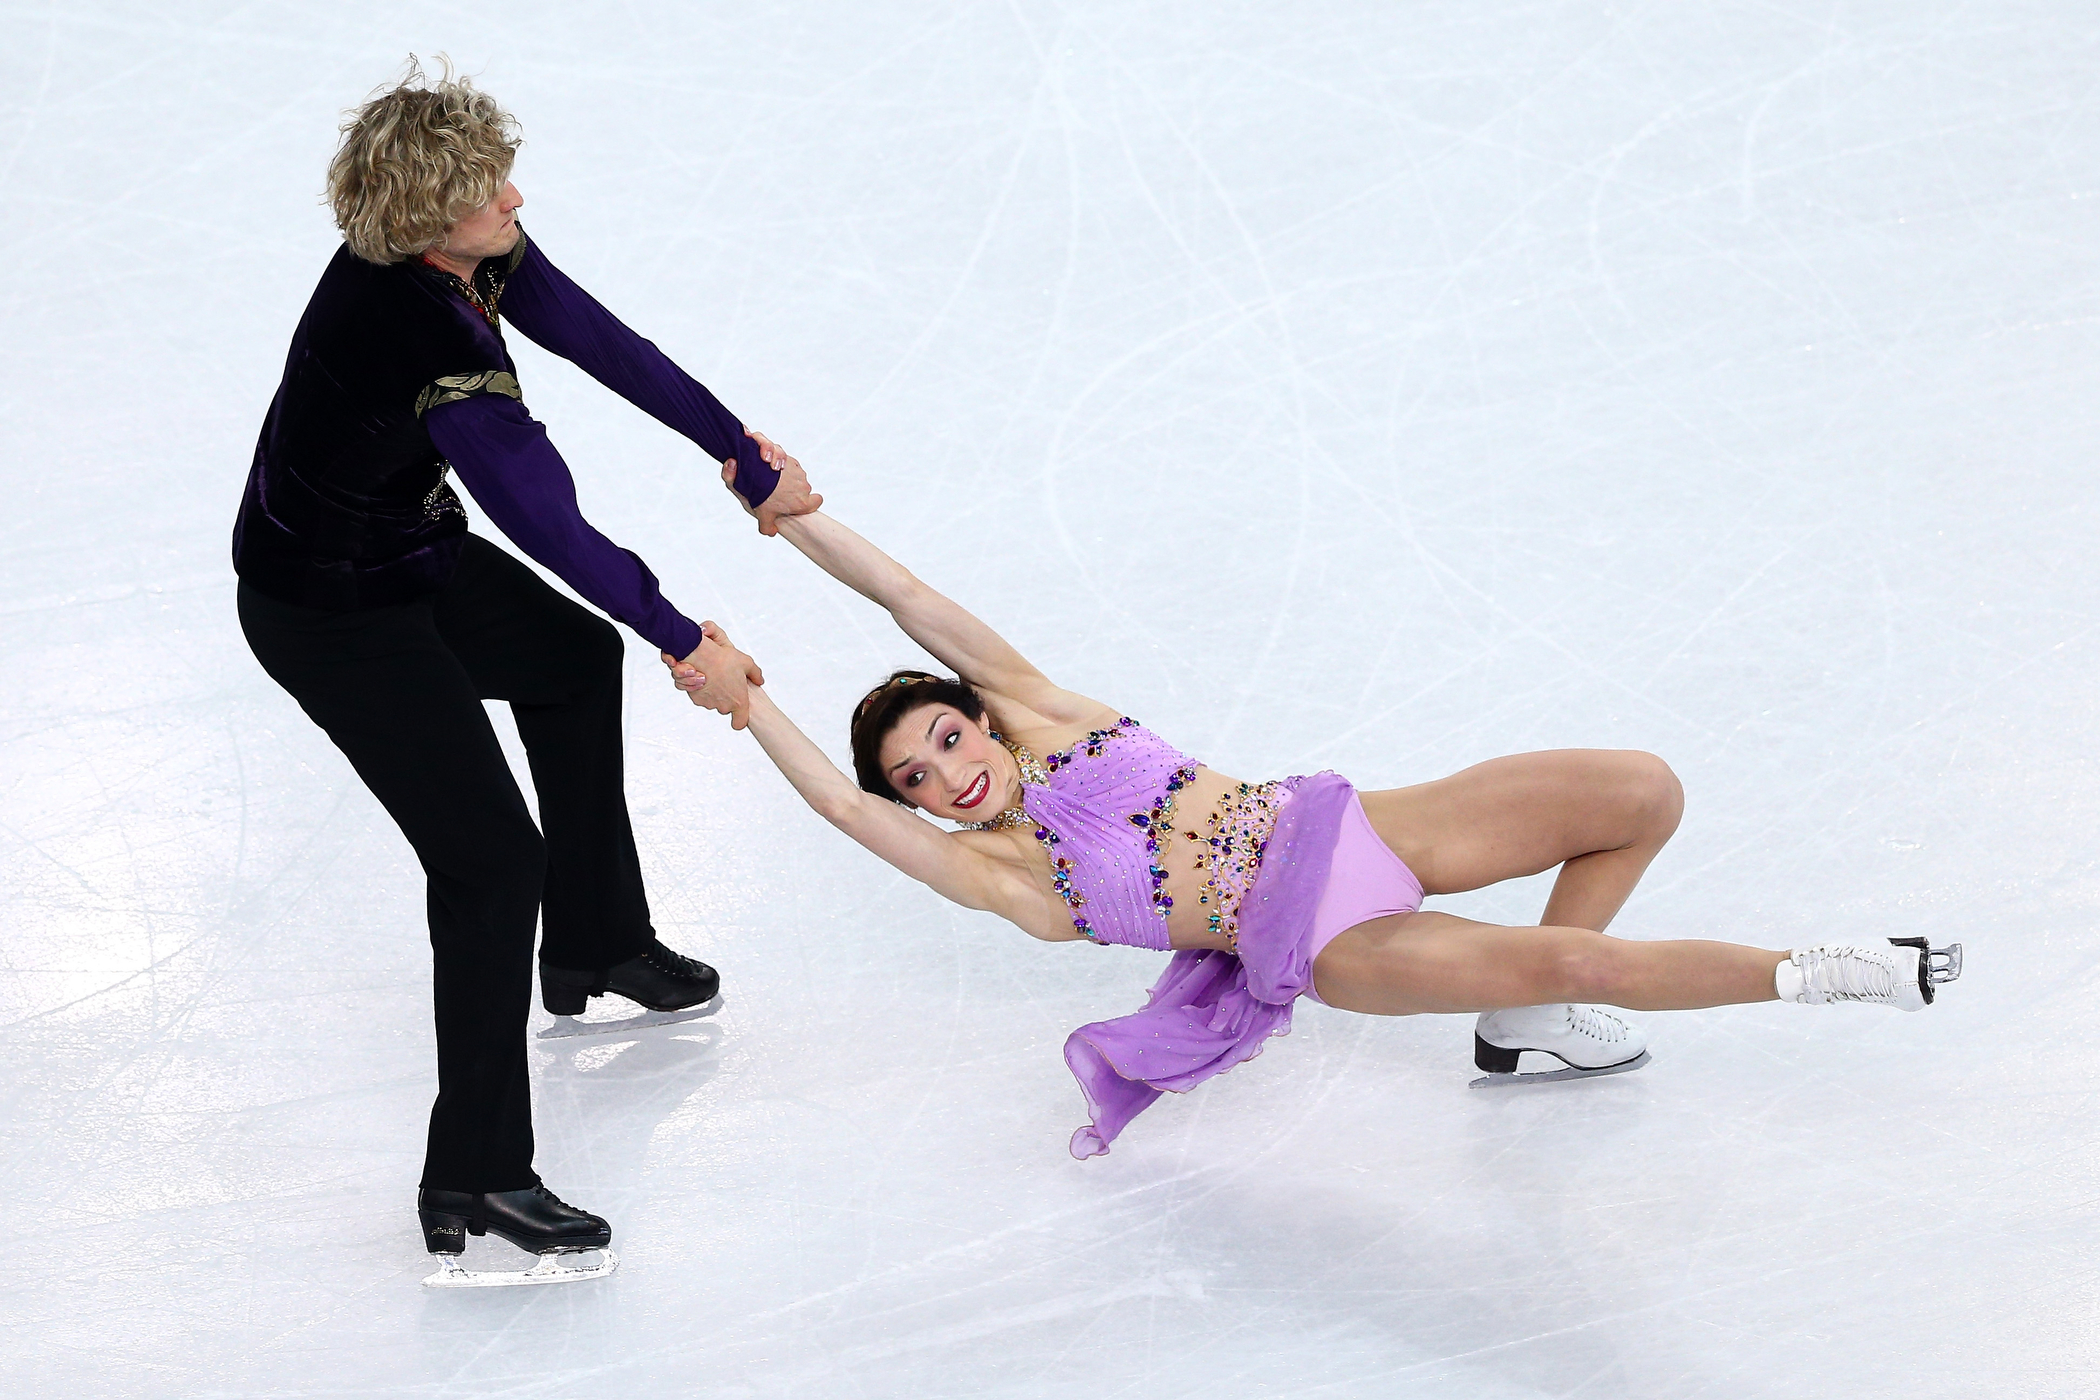 Meryl Davis and Charlie White of the United States compete in the Figure Skating Ice Dance Free Dance on Day 10 of the Sochi 2014 Winter Olympics at Iceberg Skating Palace on Feb. 17, 2014 in Sochi, Russia.